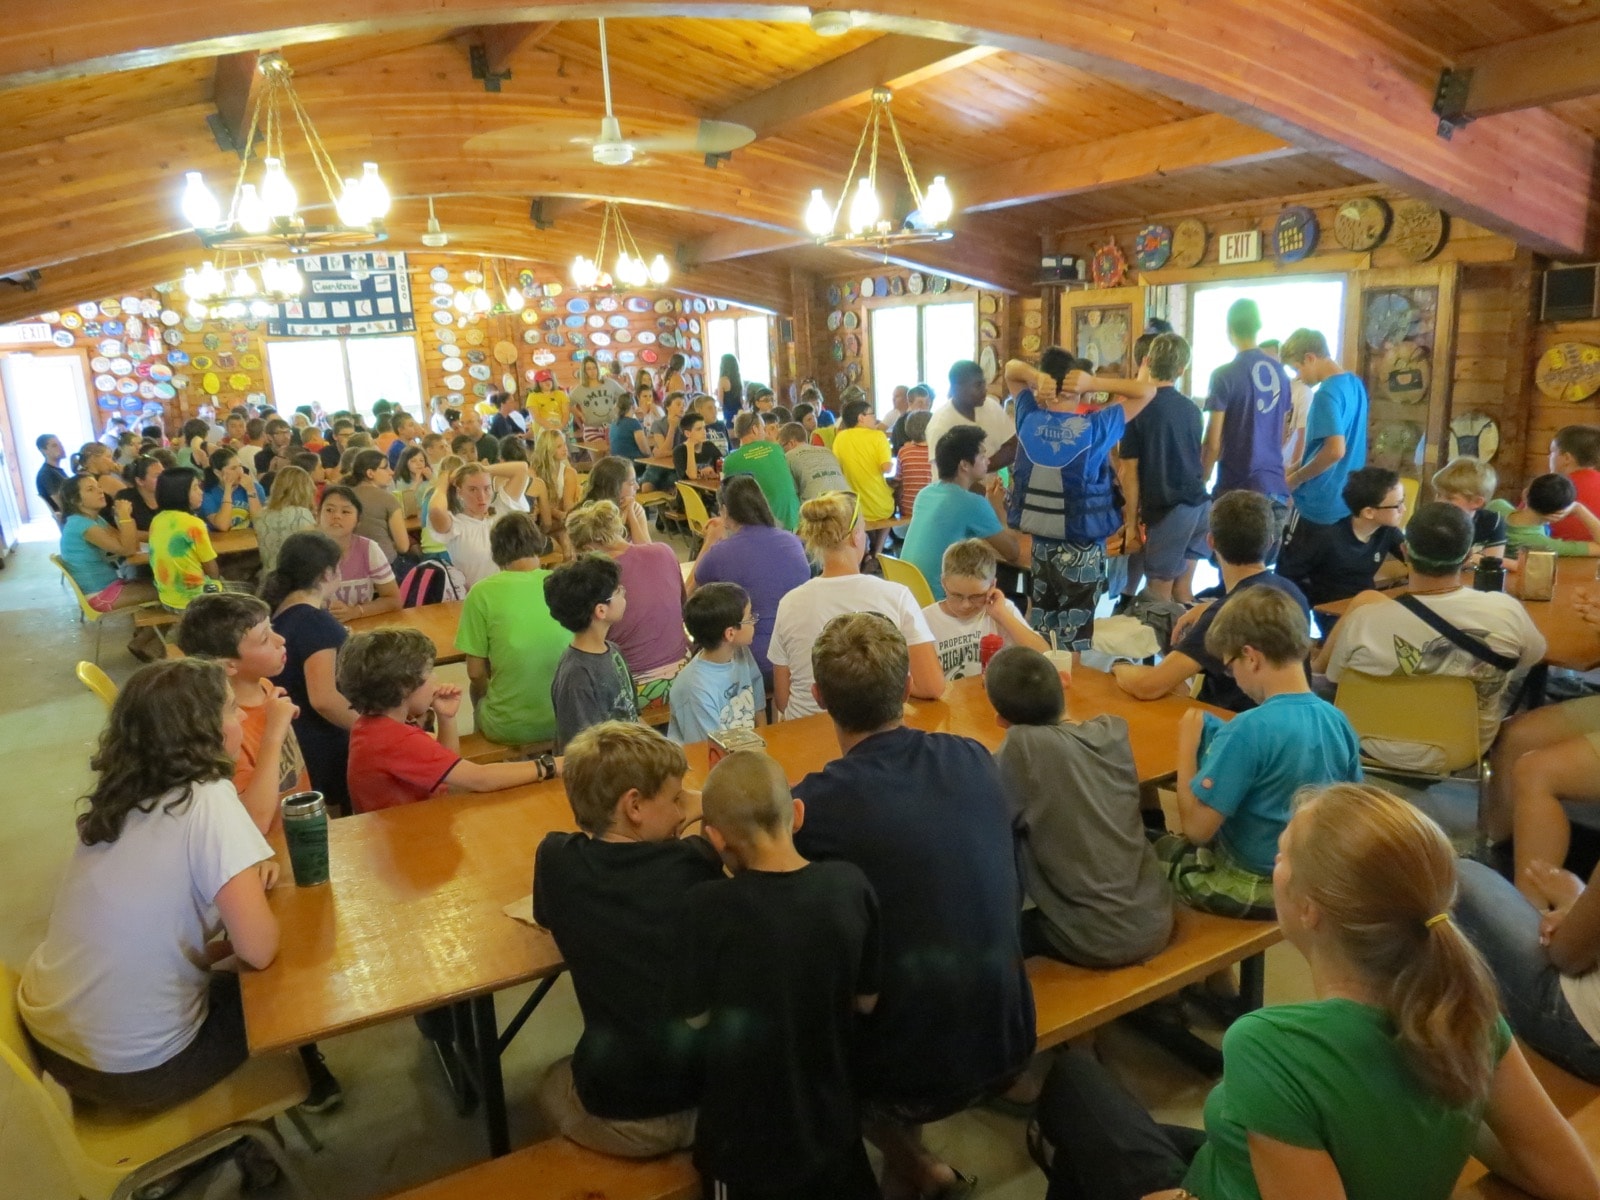 Image of Meal Time in Dining Hall